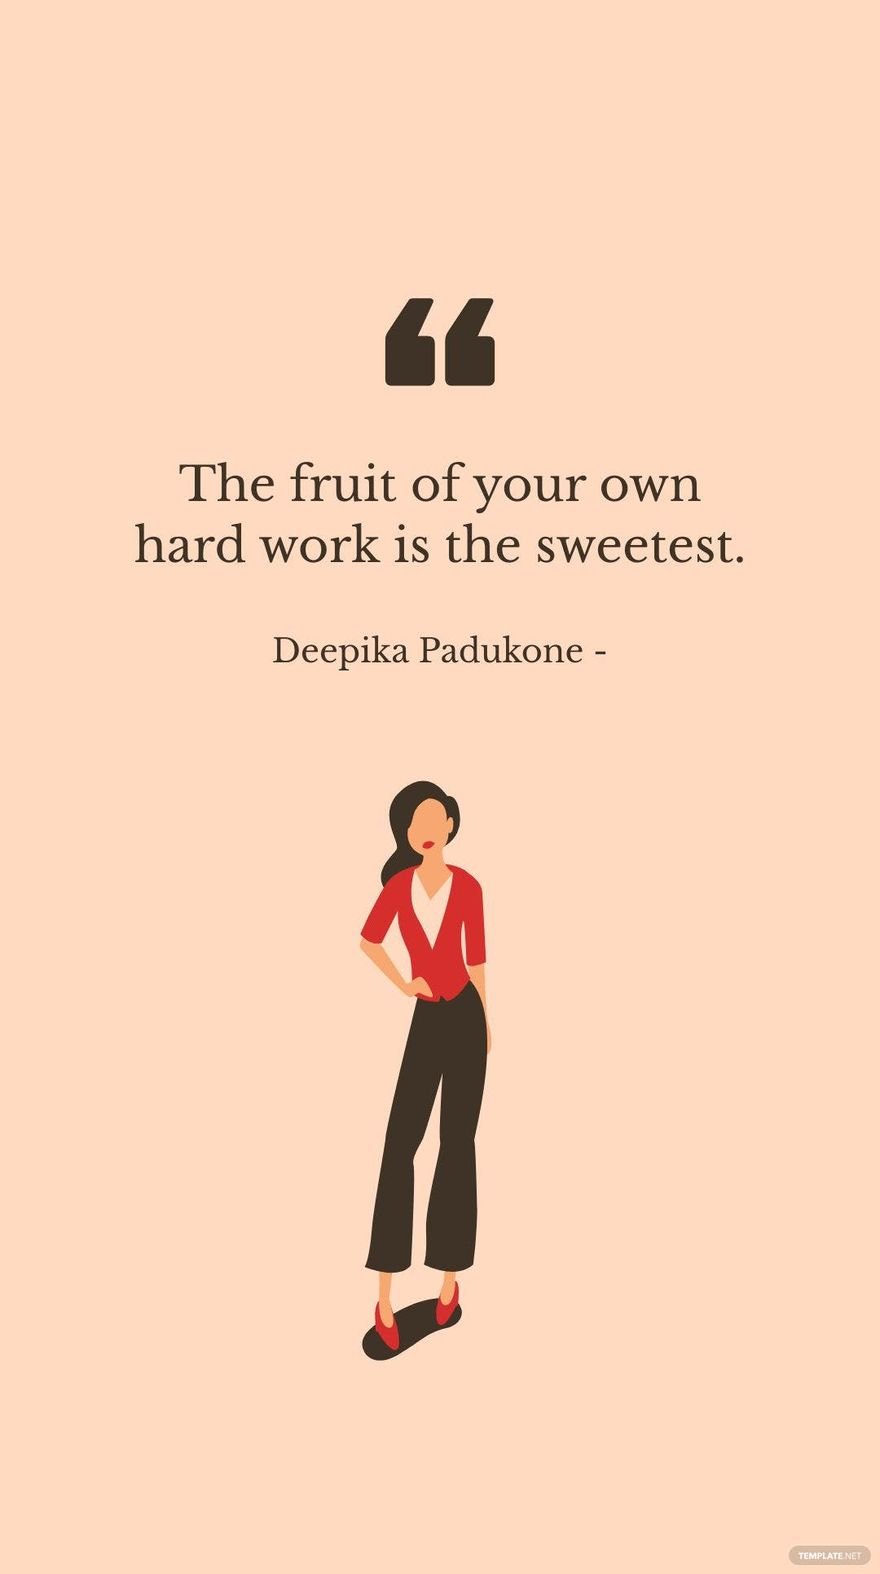 Deepika Padukone - The fruit of your own hard work is the sweetest. in JPG